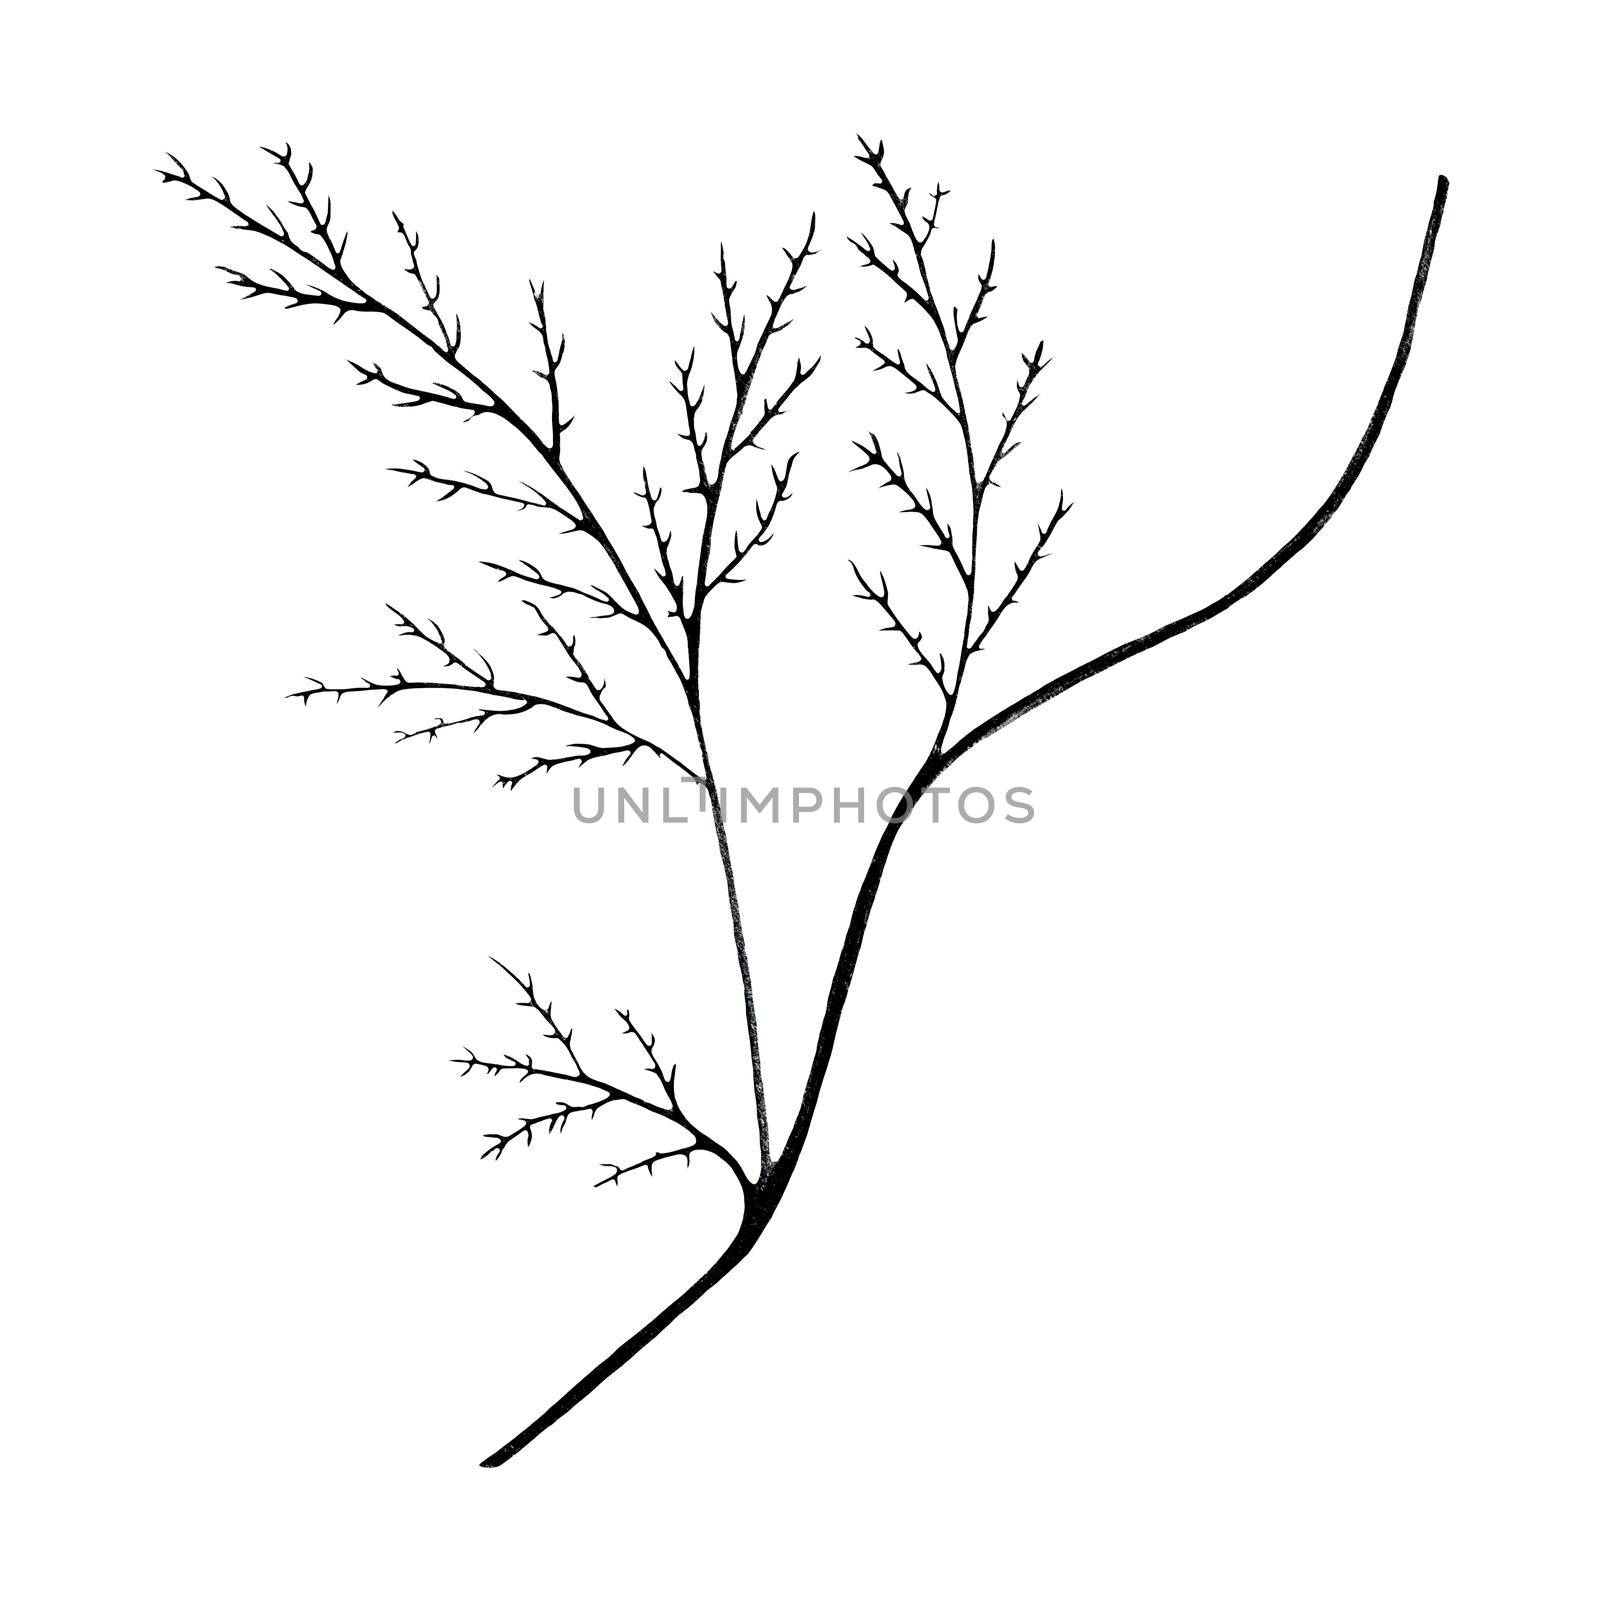 Black and White Hand Drawn Flower Leaves Isolated on White Background. Flower Branch Drawn by Black Pencil.